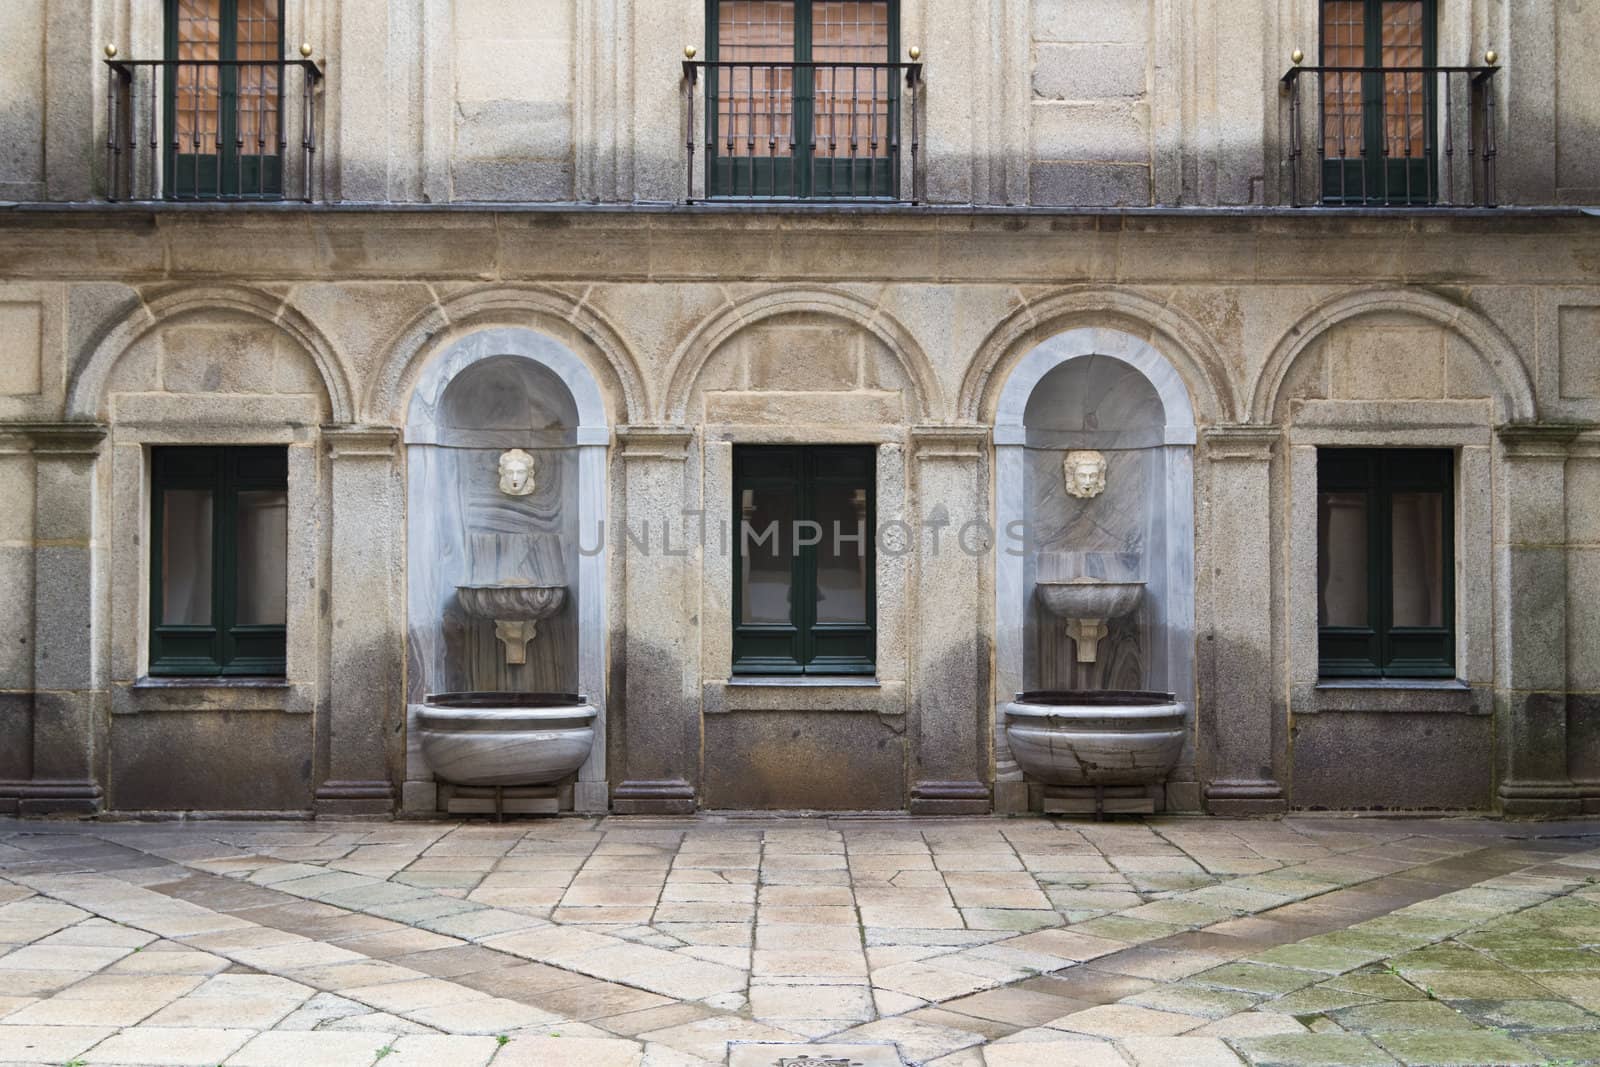 An inner courtyard of the famous renaissance building El Escorial close to Madrid, Spain